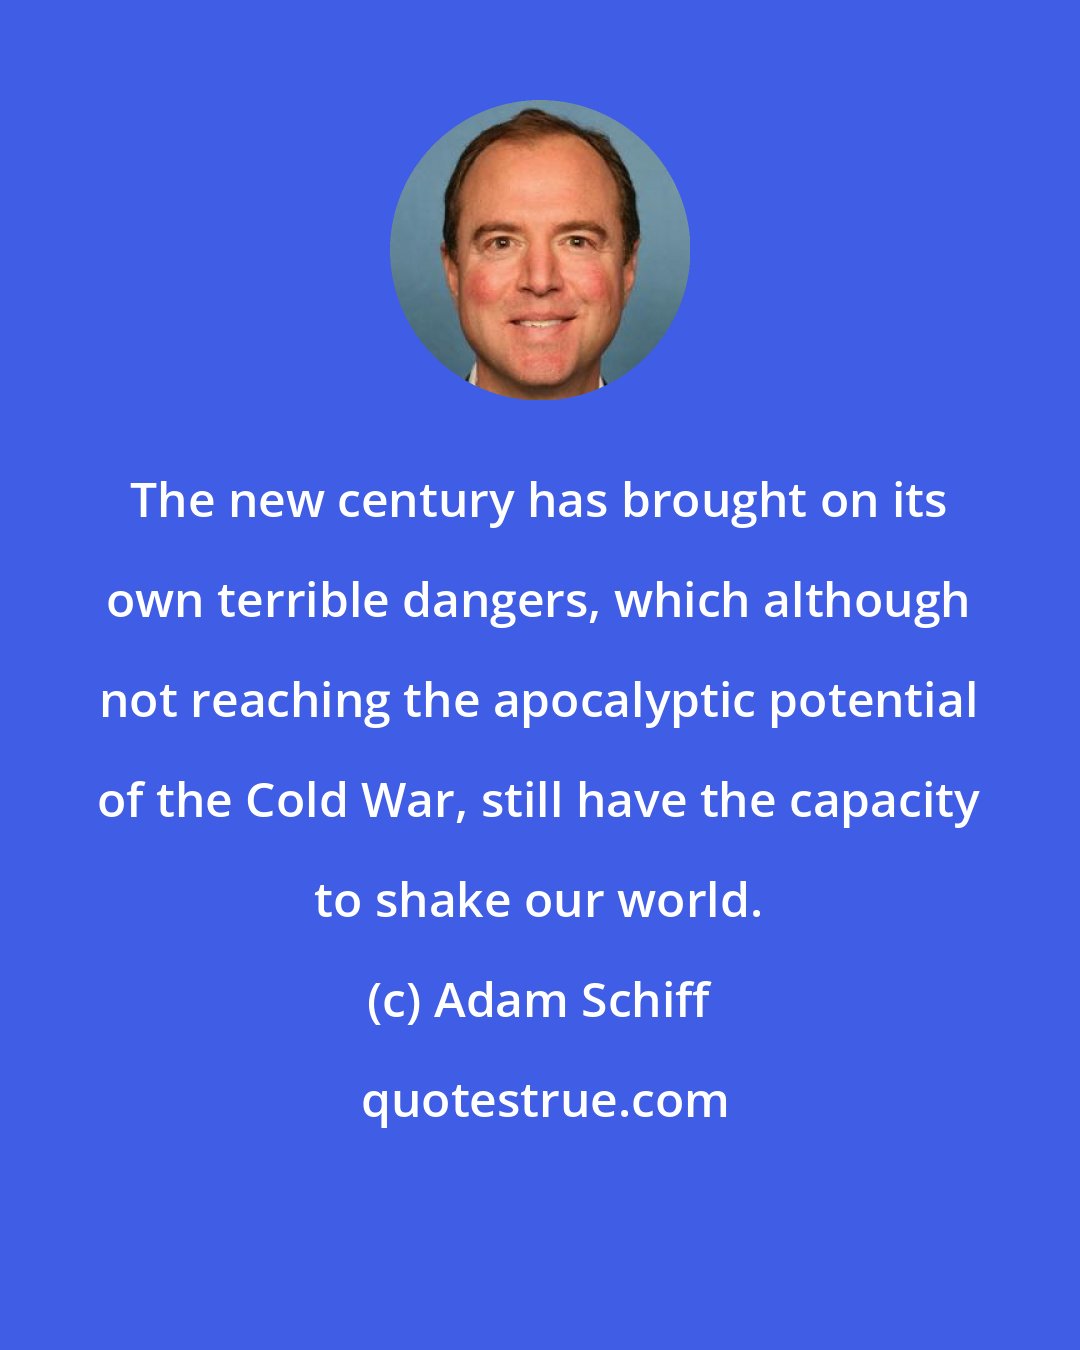 Adam Schiff: The new century has brought on its own terrible dangers, which although not reaching the apocalyptic potential of the Cold War, still have the capacity to shake our world.